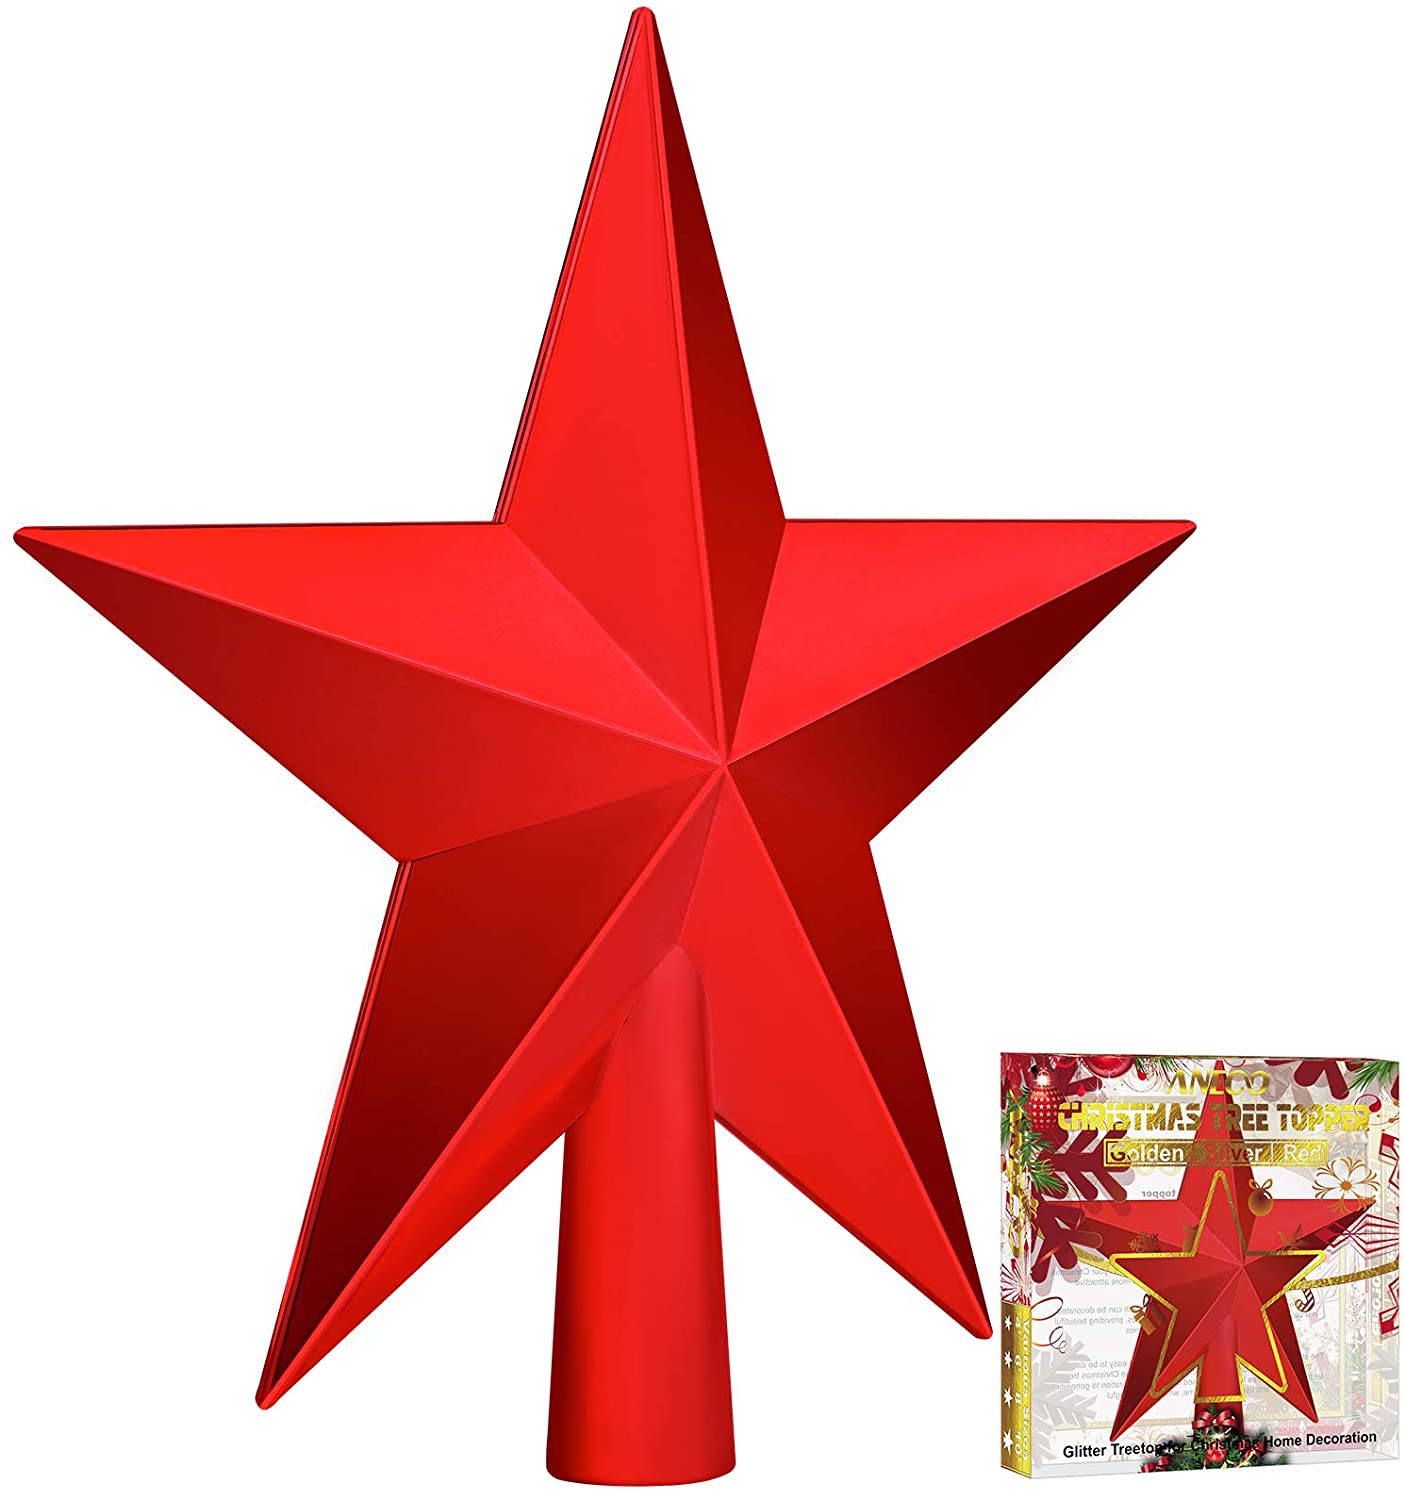 Aneco Traditional Glossy Christmas Tree Toppers Decoration Star Treetop Ornaments Holiday Decoration for Home Decor 